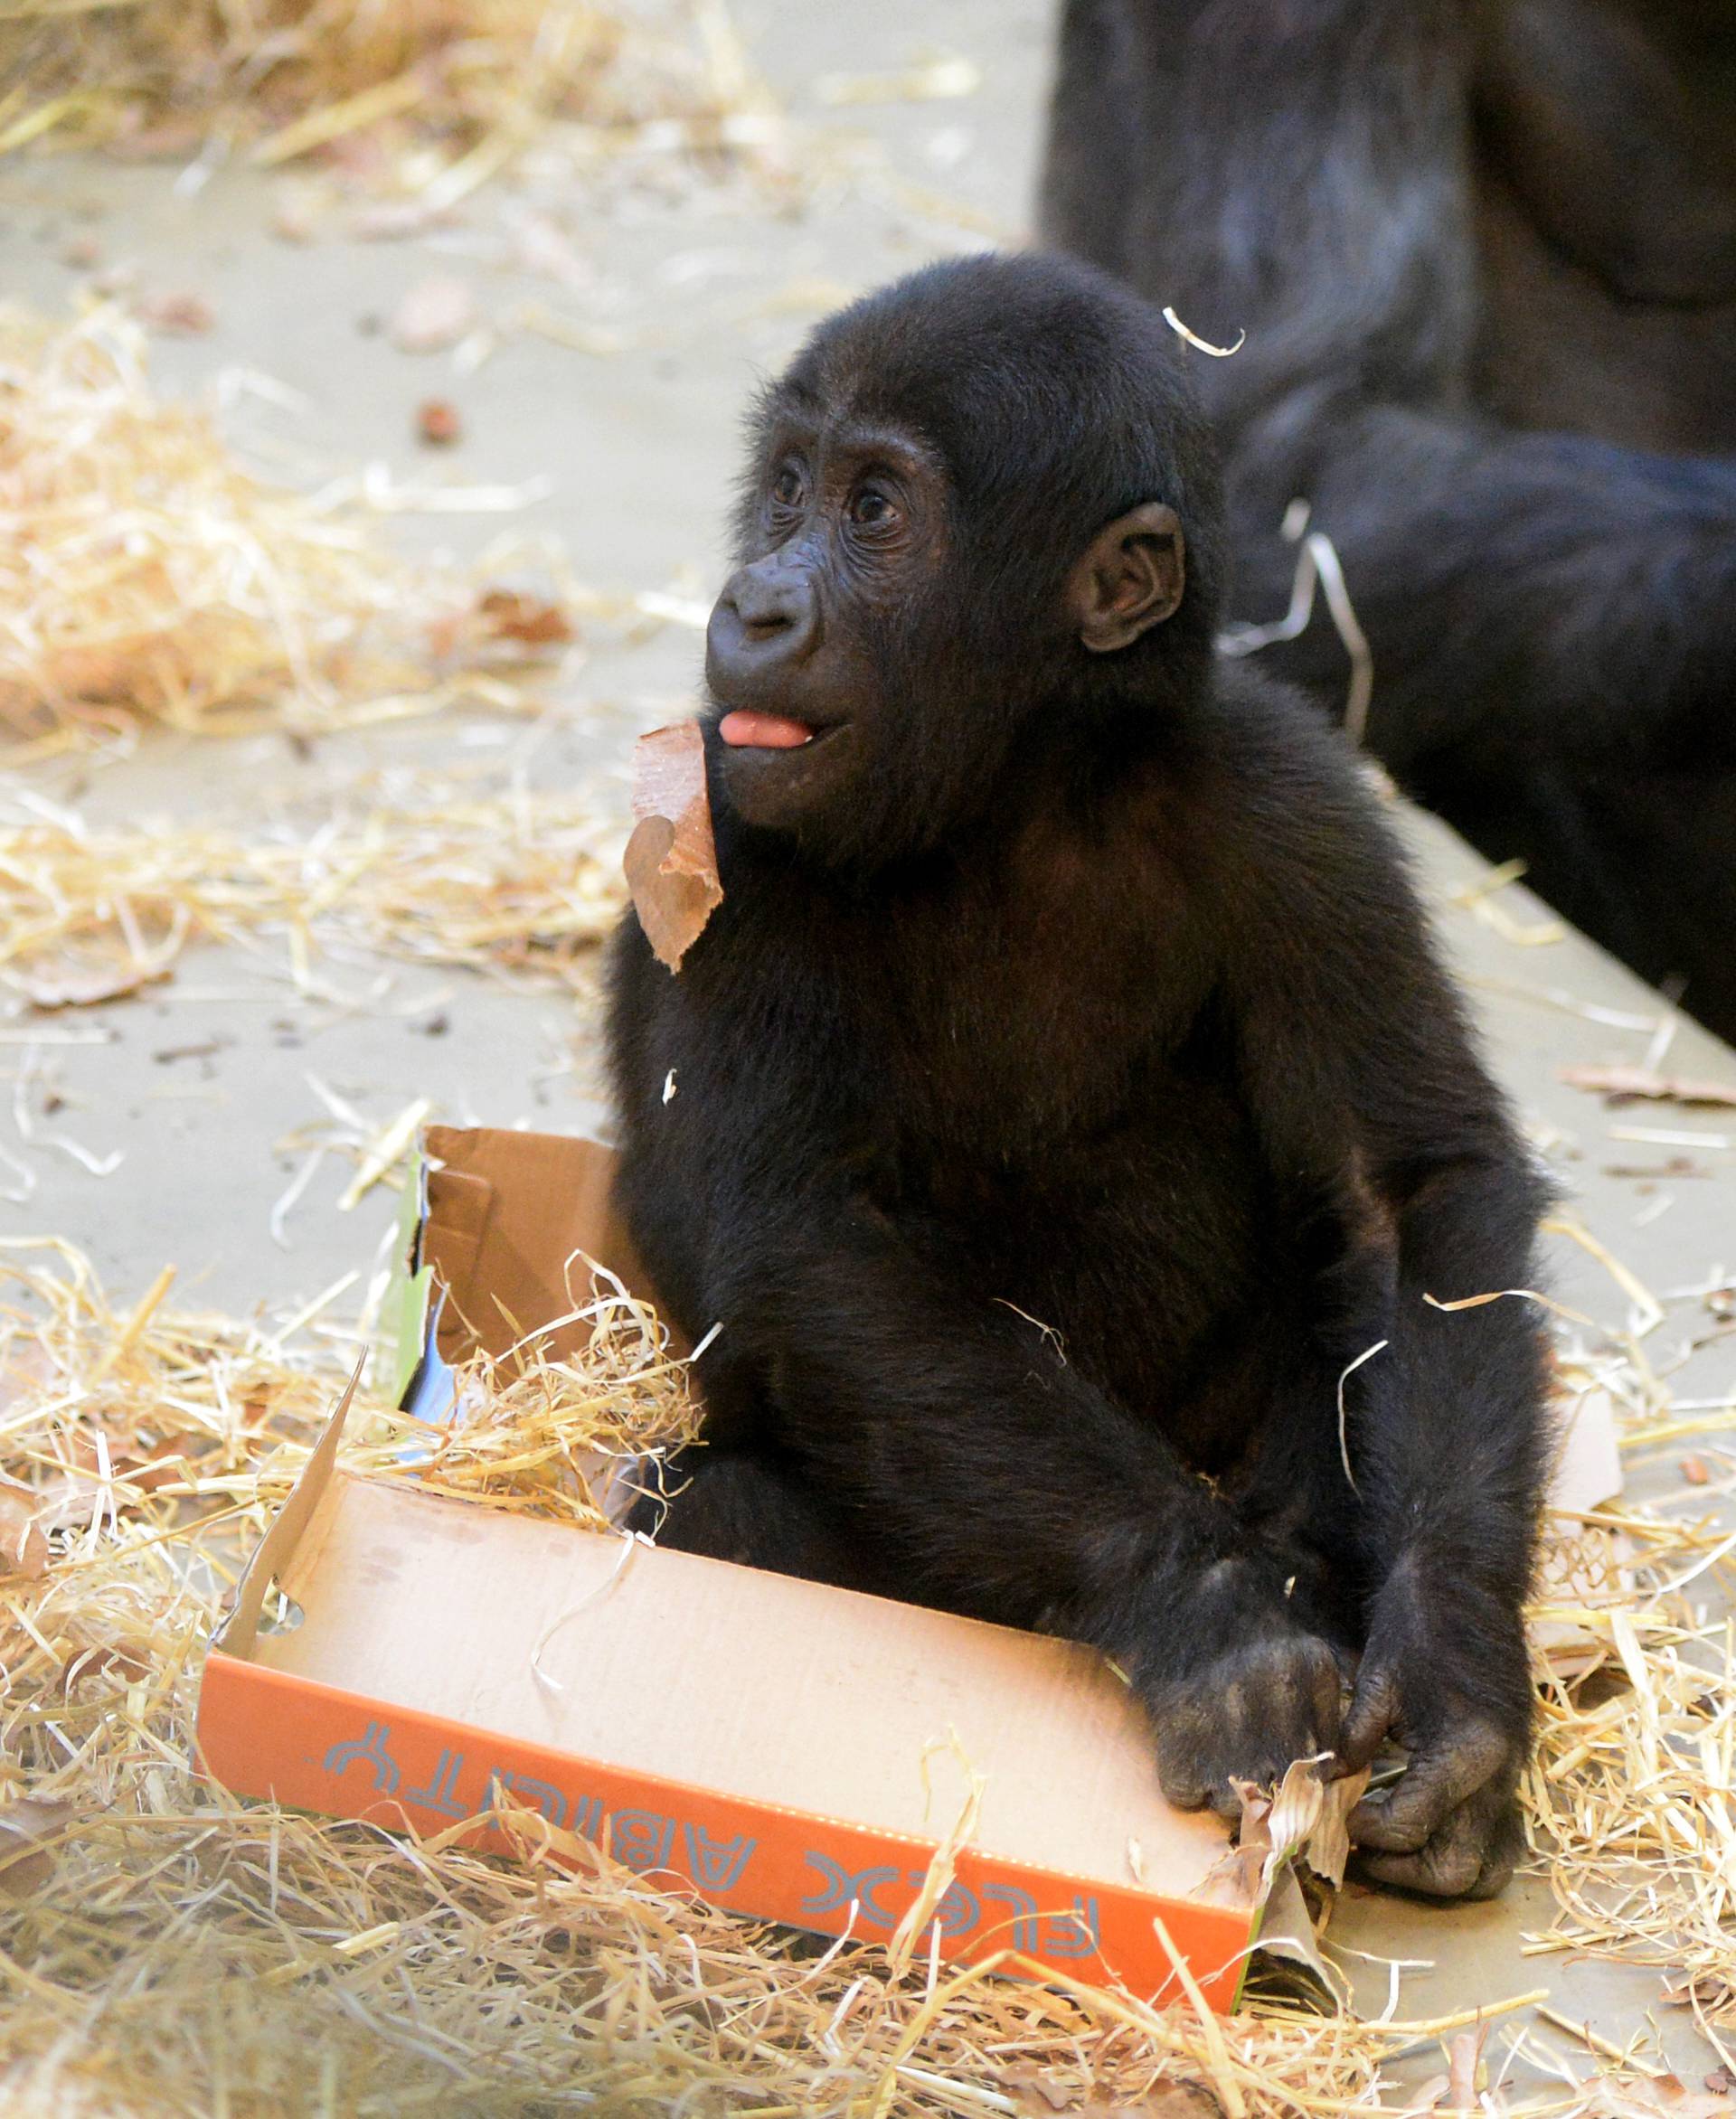 Christmas gifts for gorillas at the Wilhelma zoo